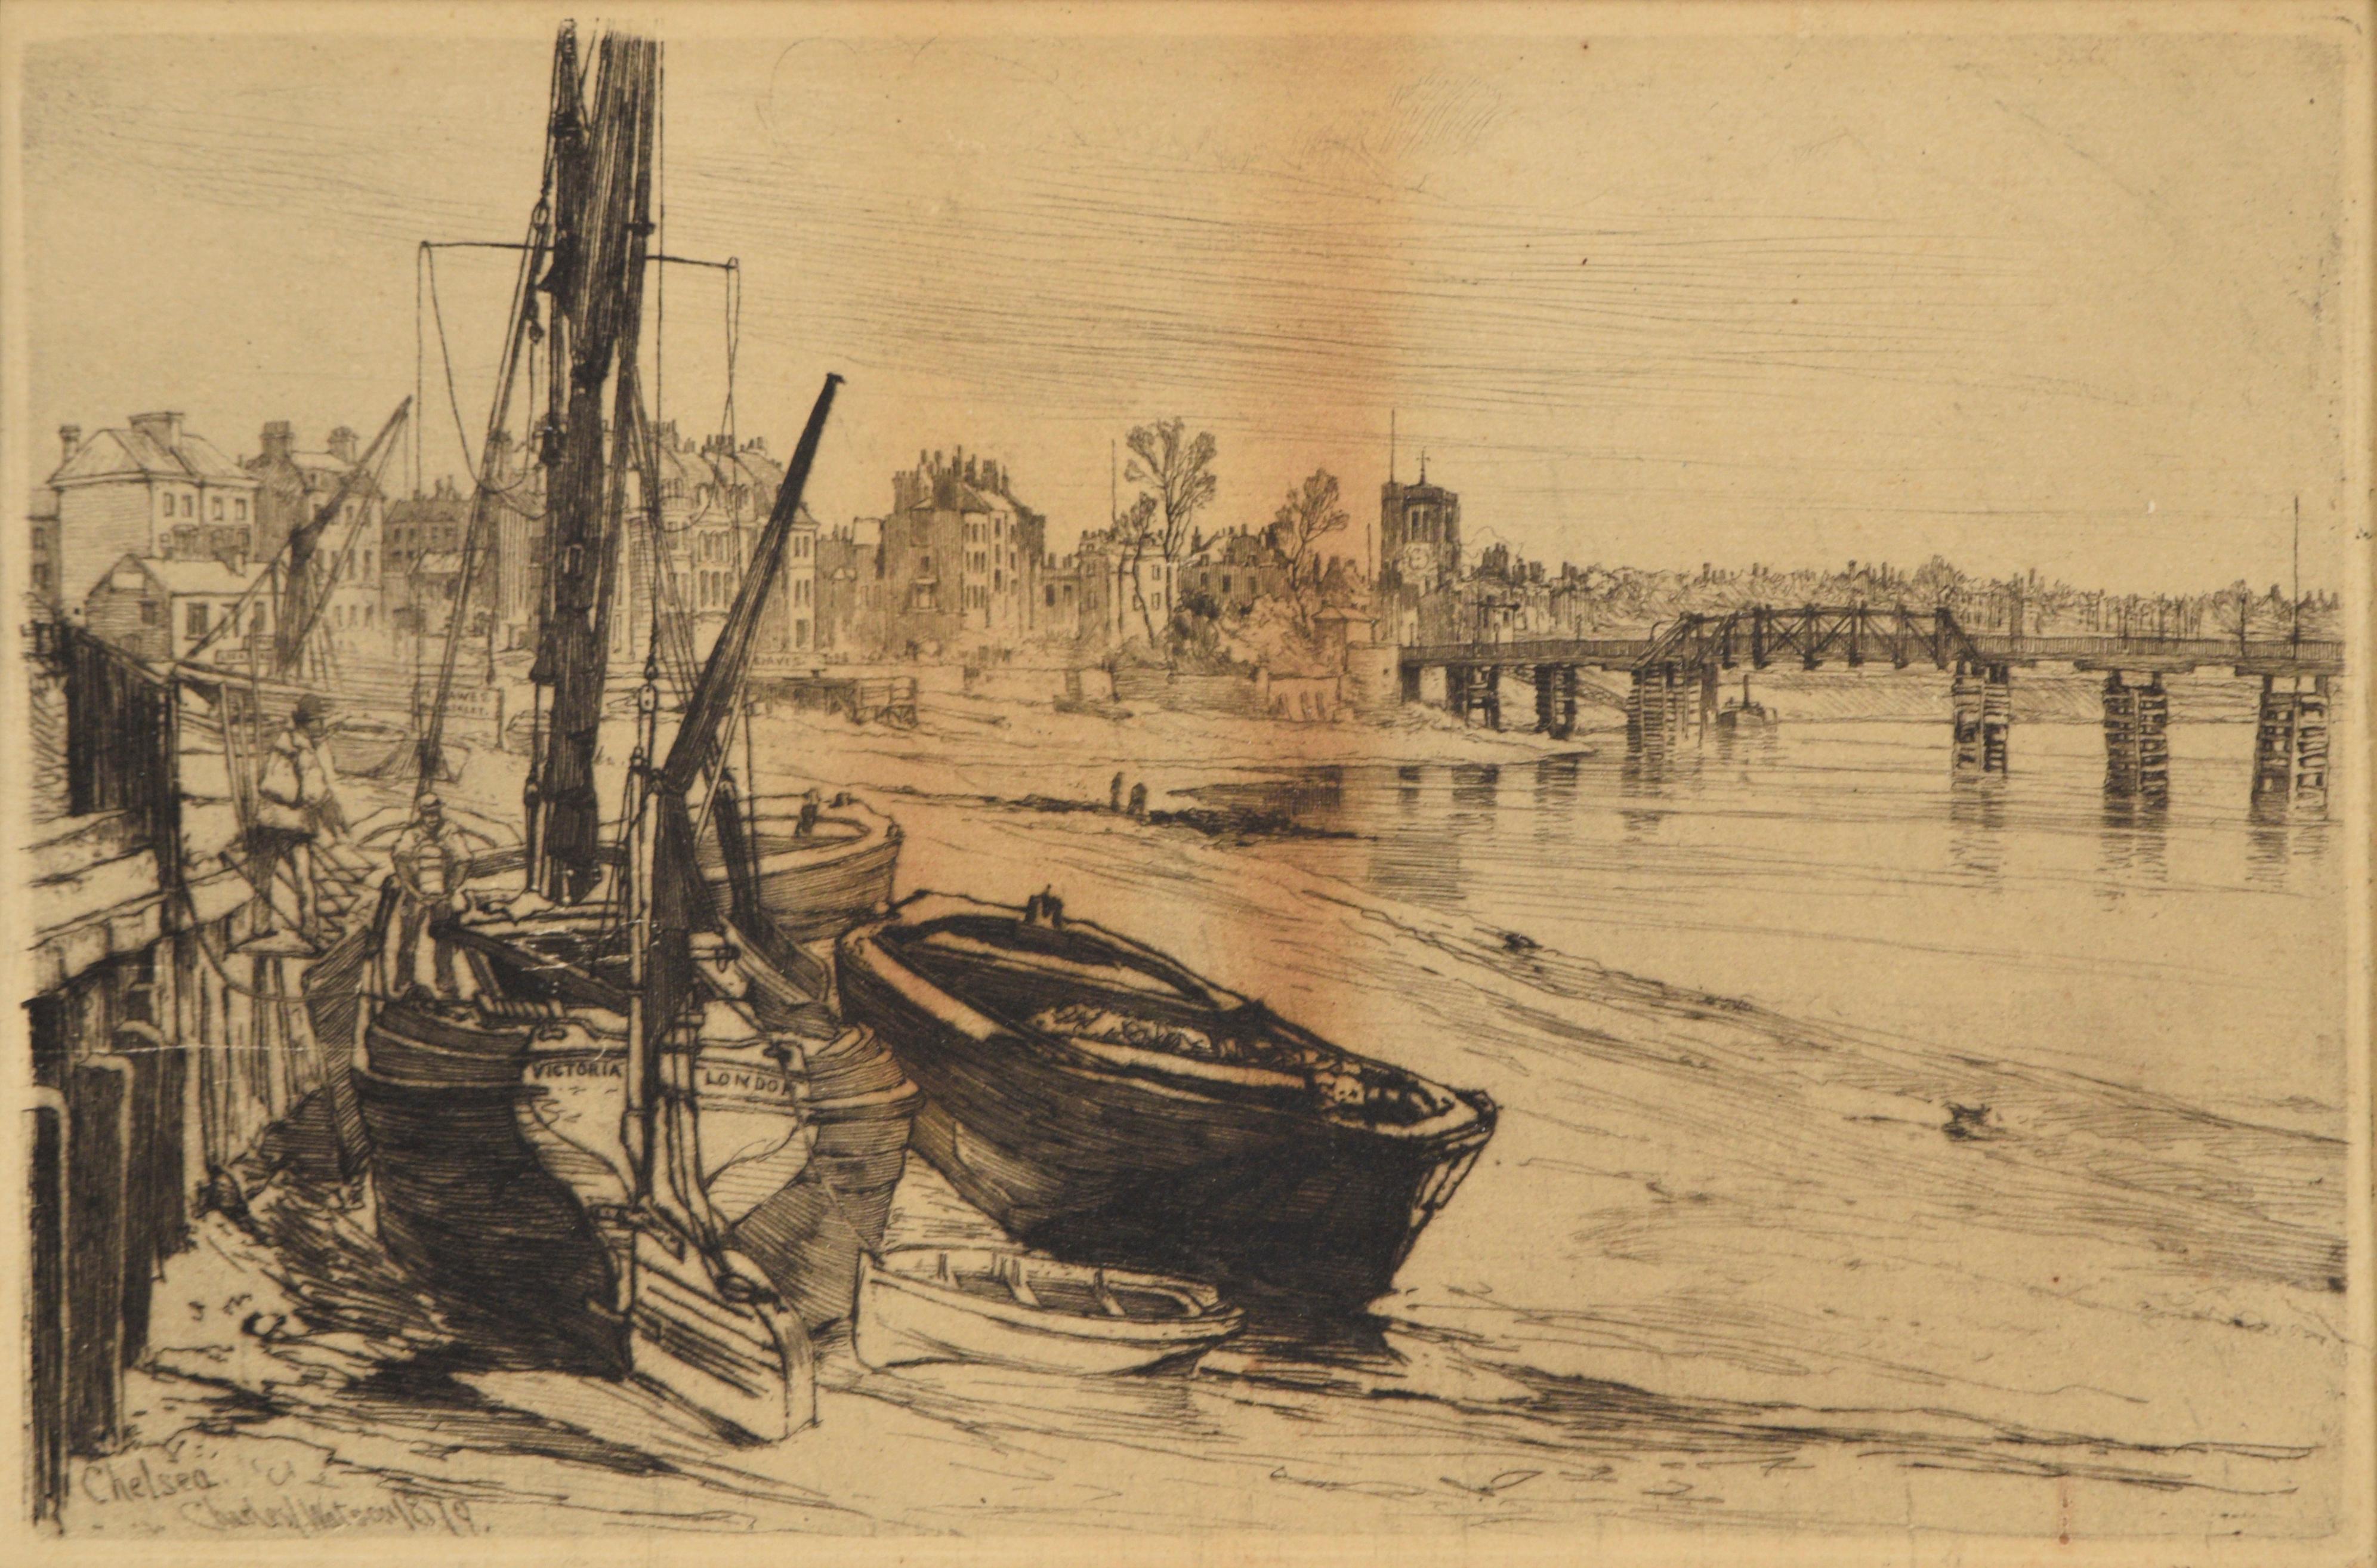 Old Battersea Bridge View, Chelsea, 1879 - Etching on Paper - Impressionist Print by Charles John Watson